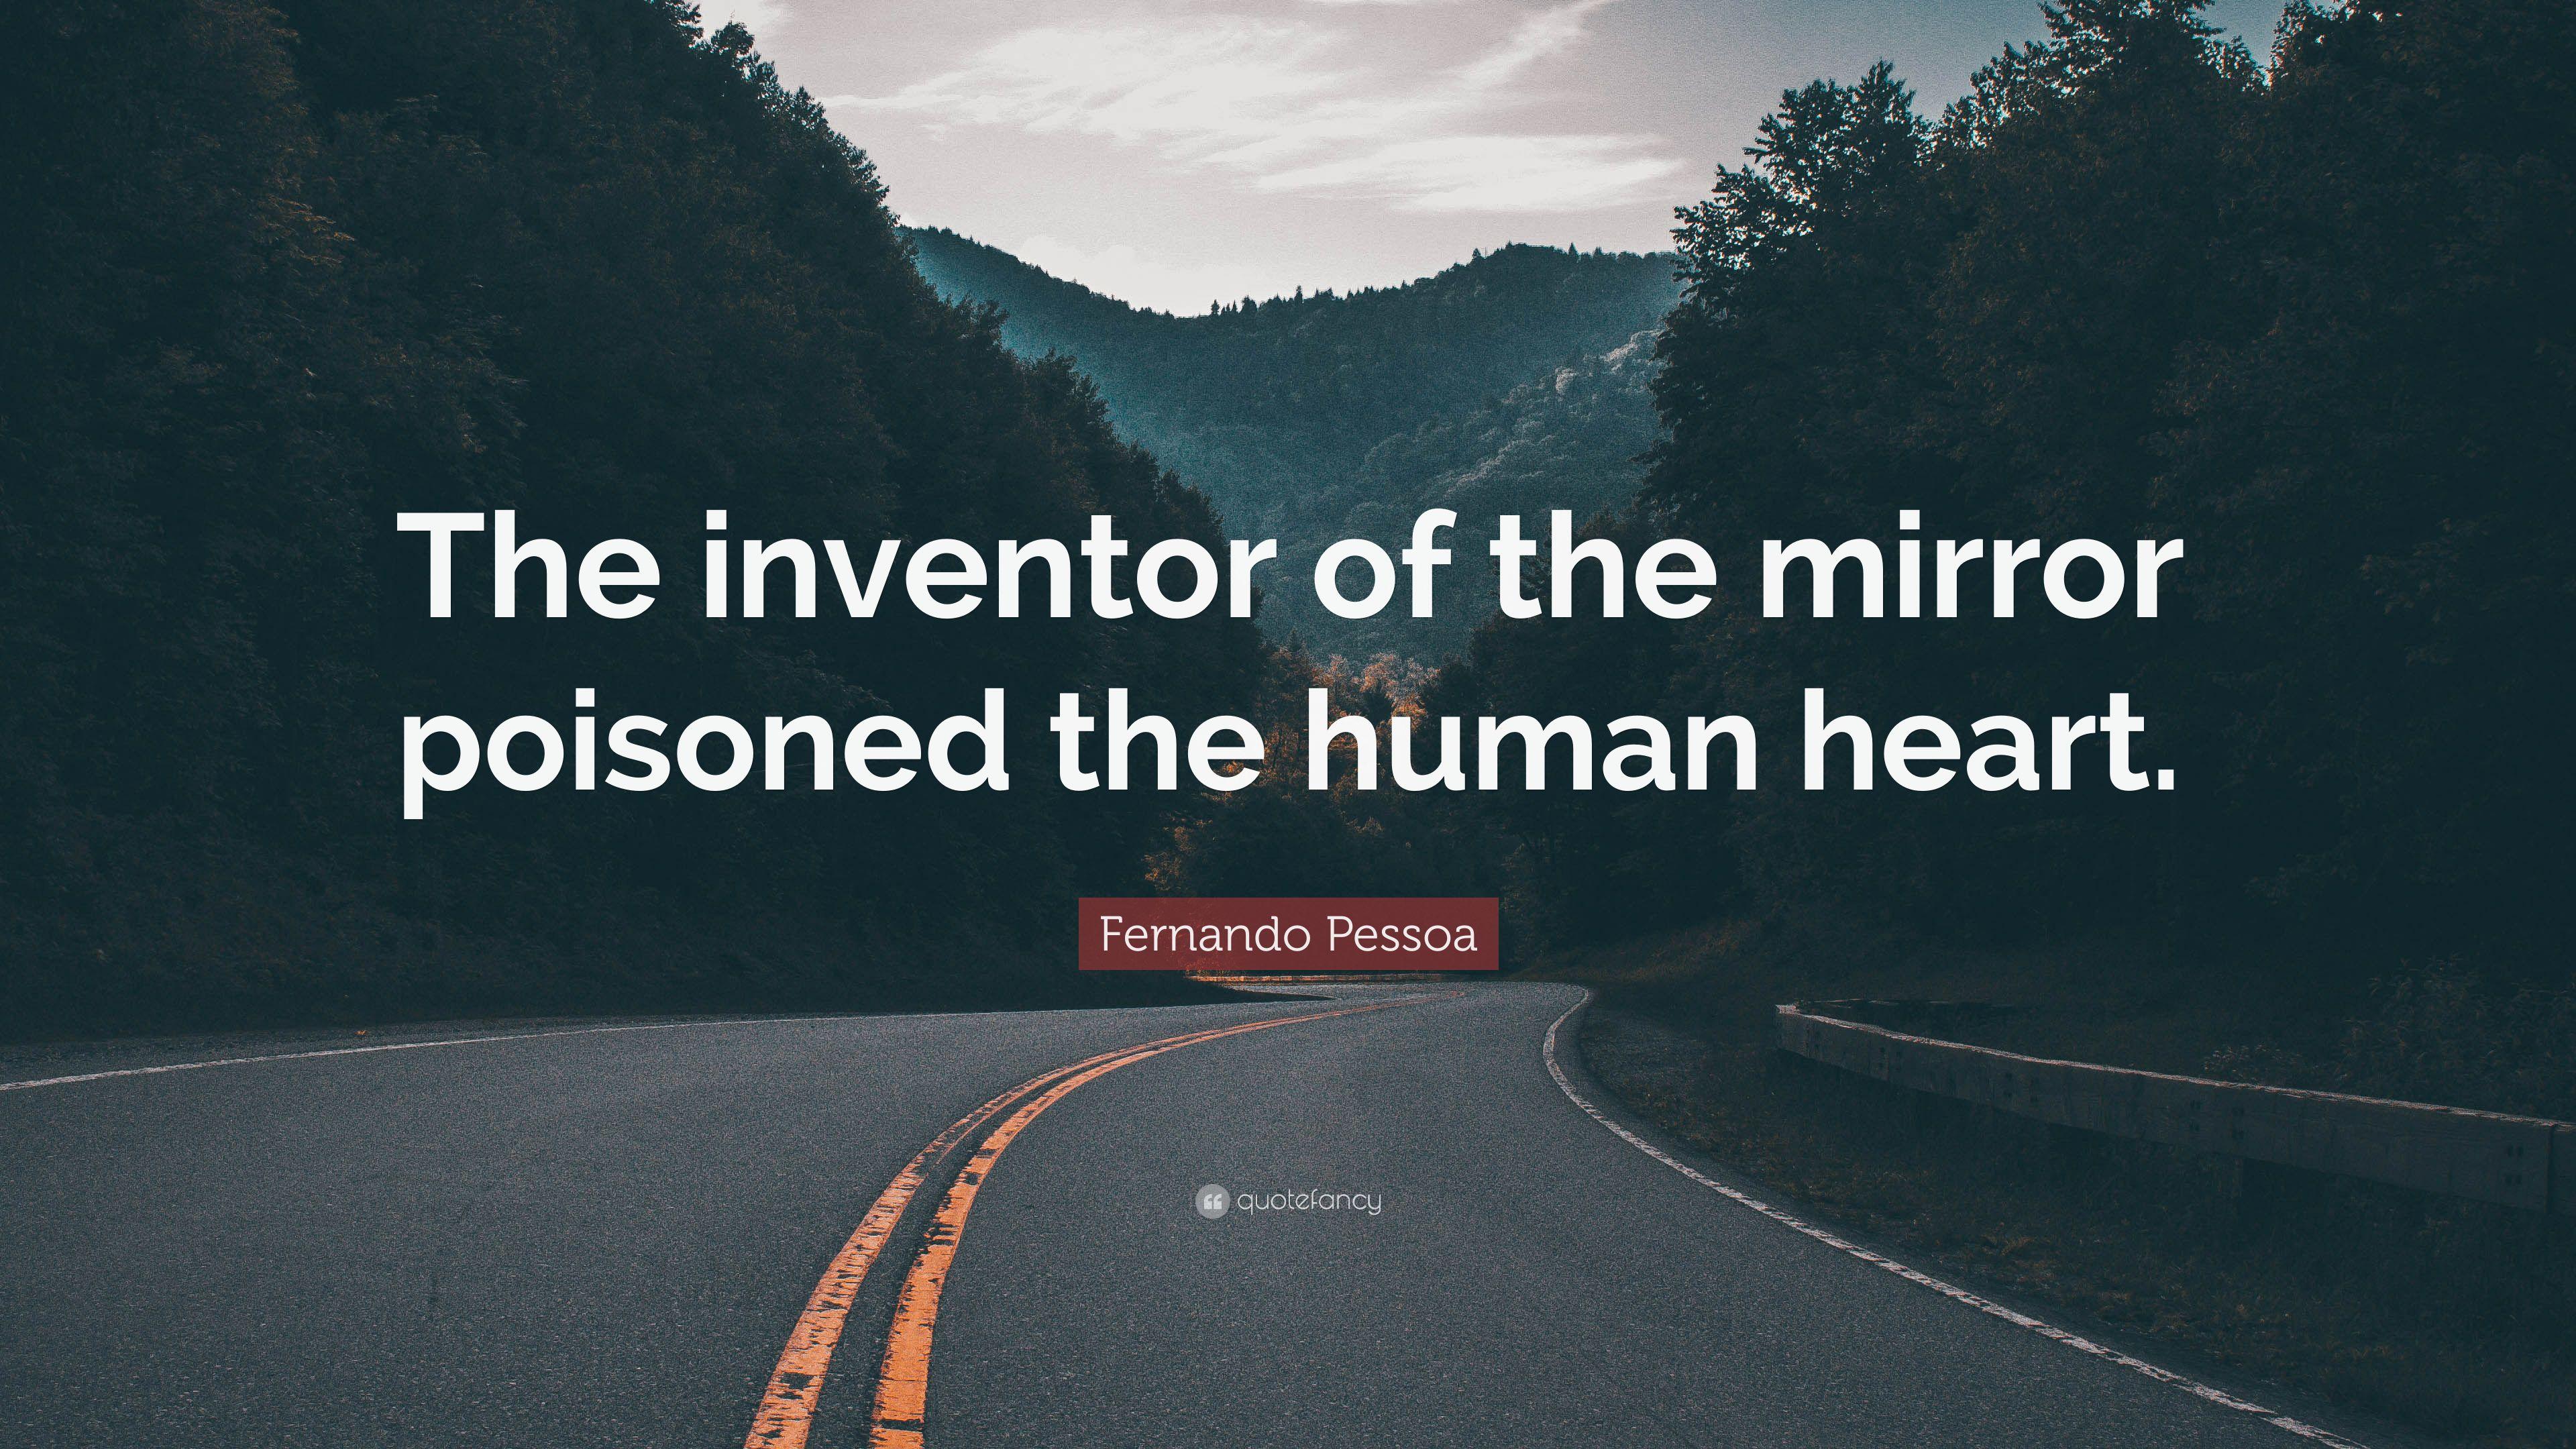 Fernando Pessoa Quote: “The inventor of the mirror poisoned